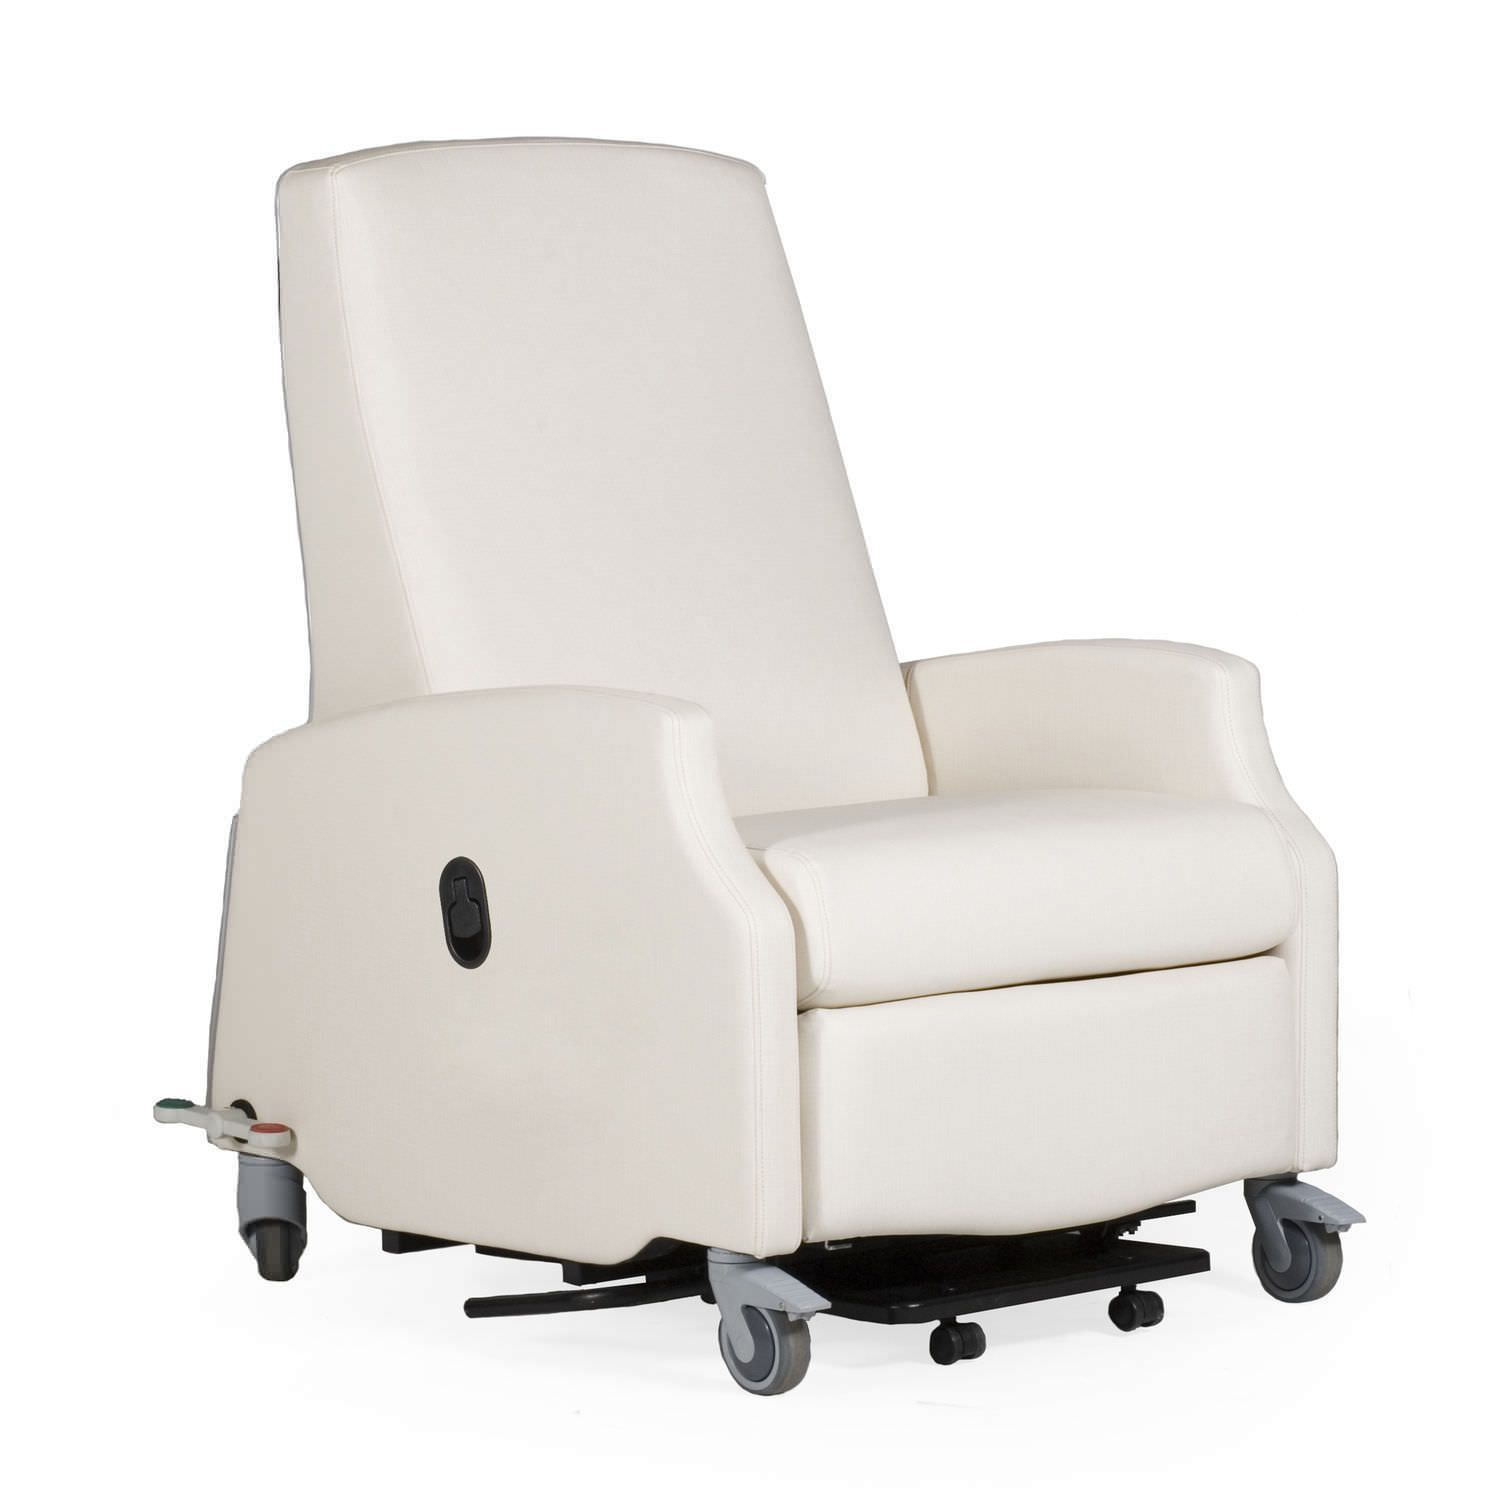 Healthcare facility convertible chair / on casters IN7000 series La-Z-Boy Contract Furniture